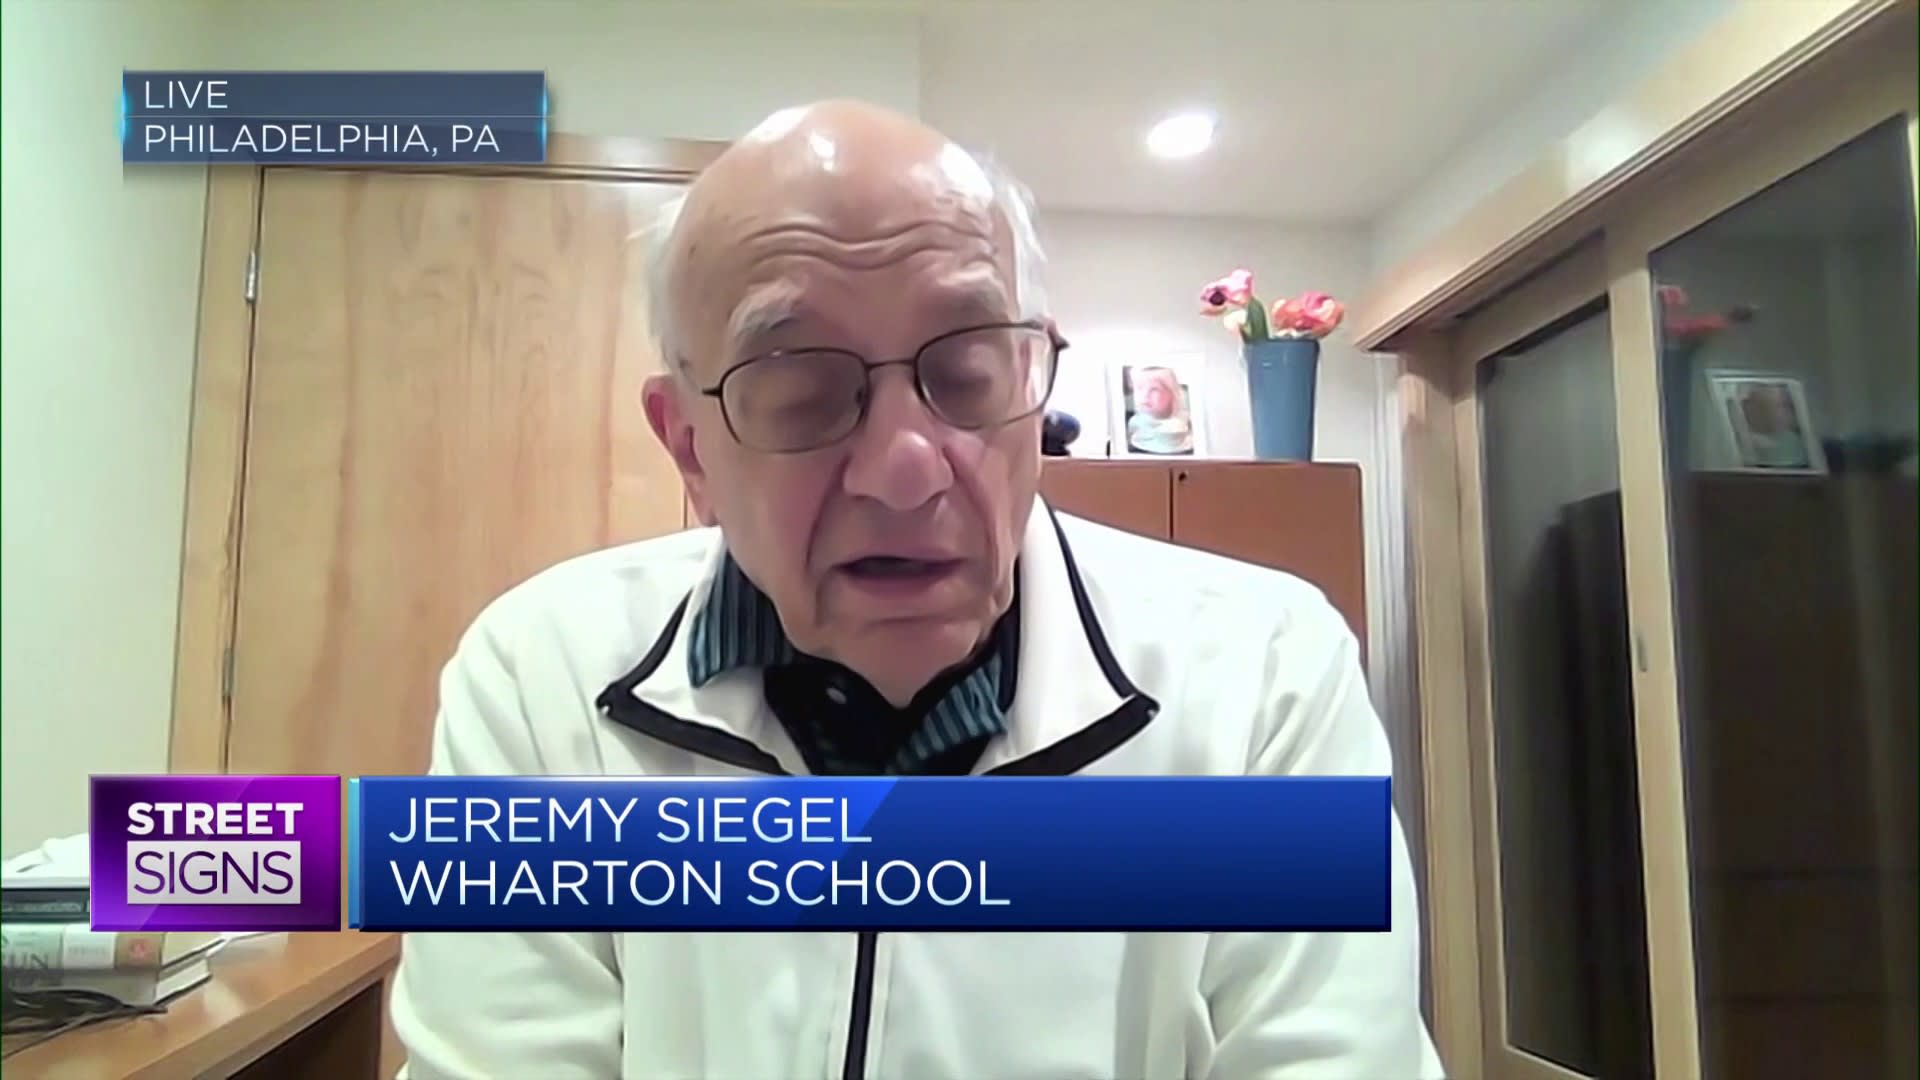 'It's not a bubble yet': Wharton's Jeremy Siegel predicts Big Tech boom fueled by A.I.